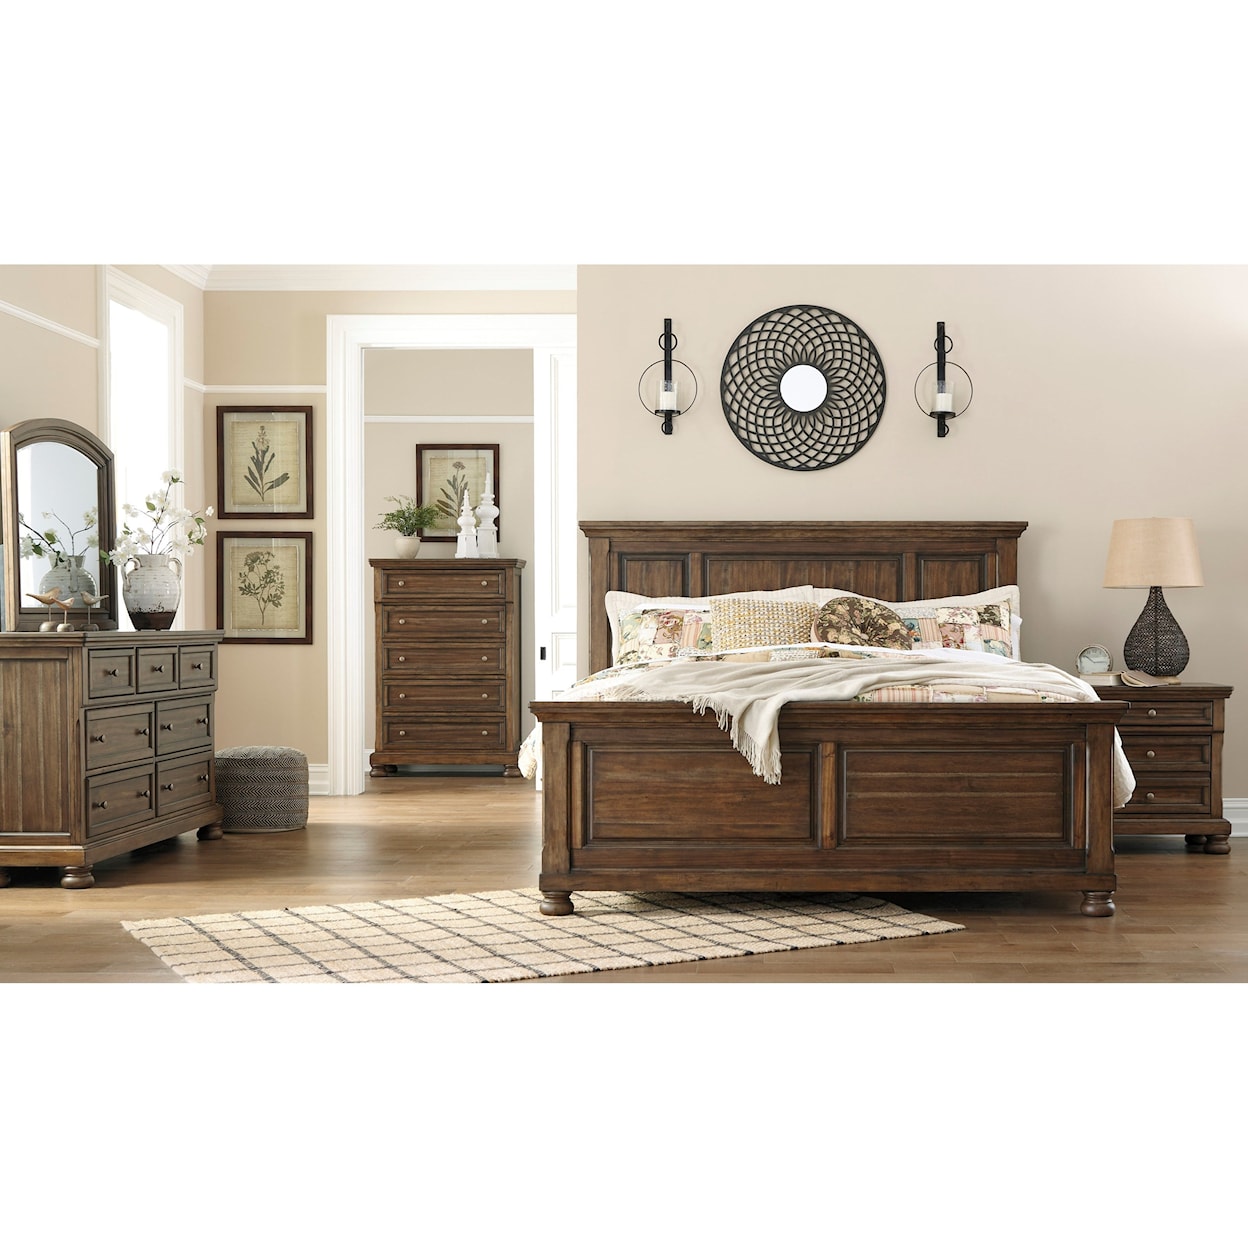 Signature Design by Ashley Furniture Flynnter Queen Bedroom Group